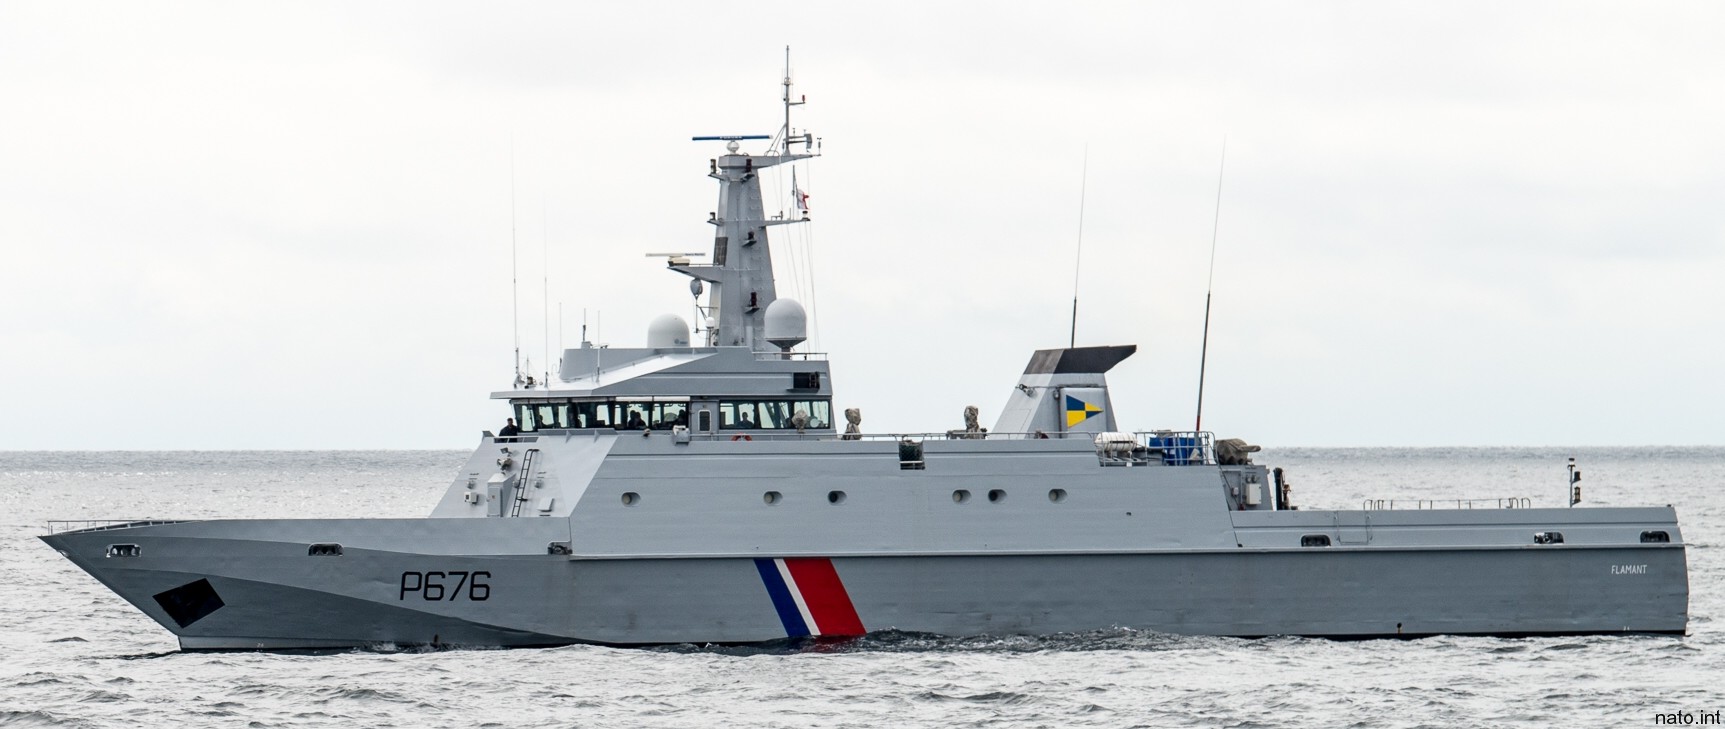 p-676 flamant class offshore patrol vessel opv french navy patrouilleur marine nationale 14